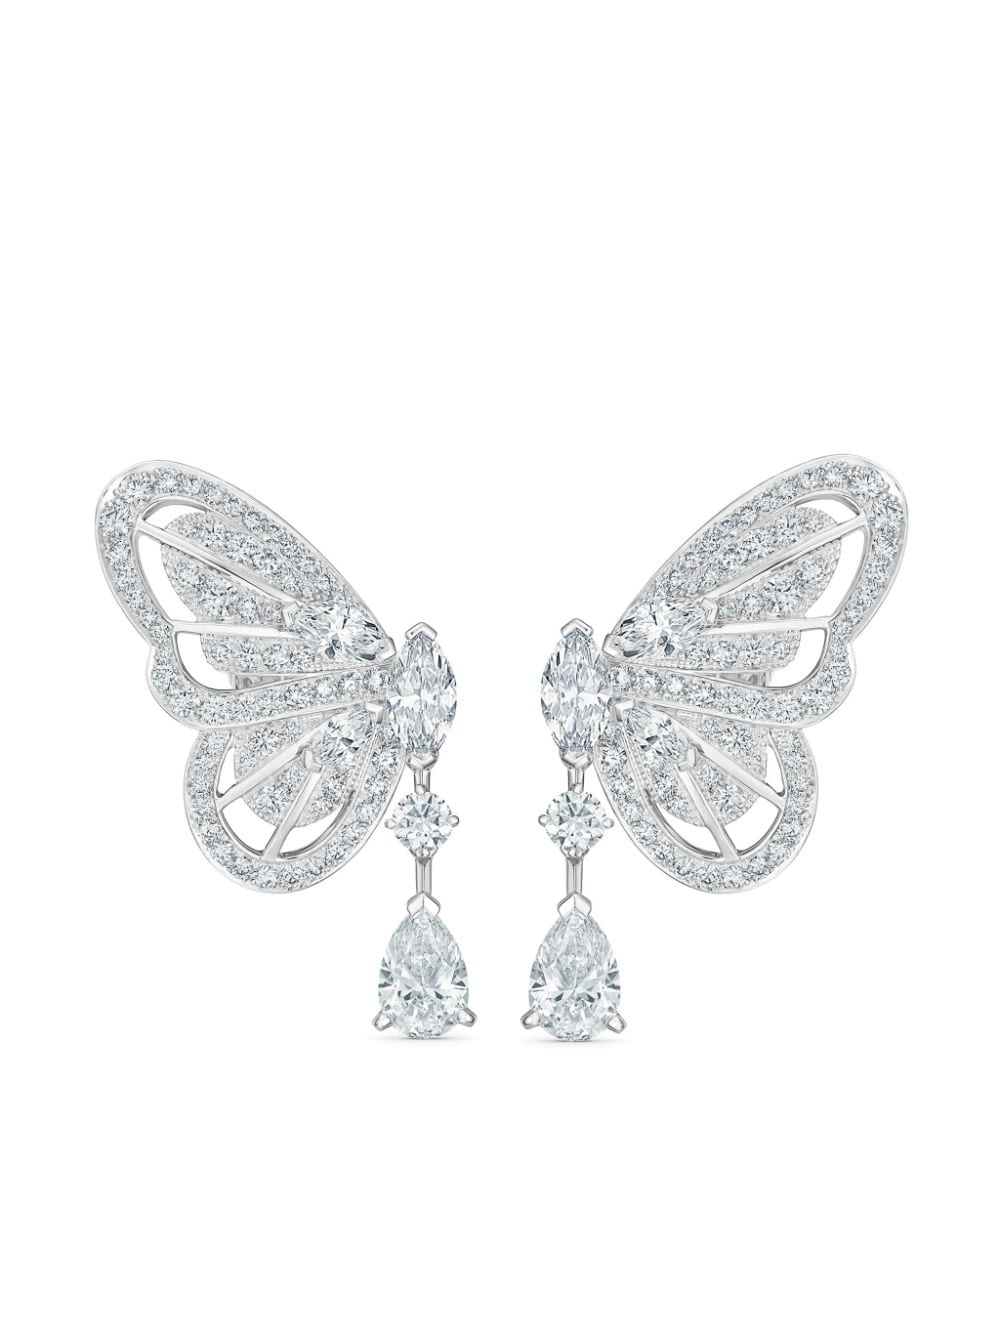 Image 1 of De Beers Jewellers 18kt white gold Portraits of Nature diamond earrings